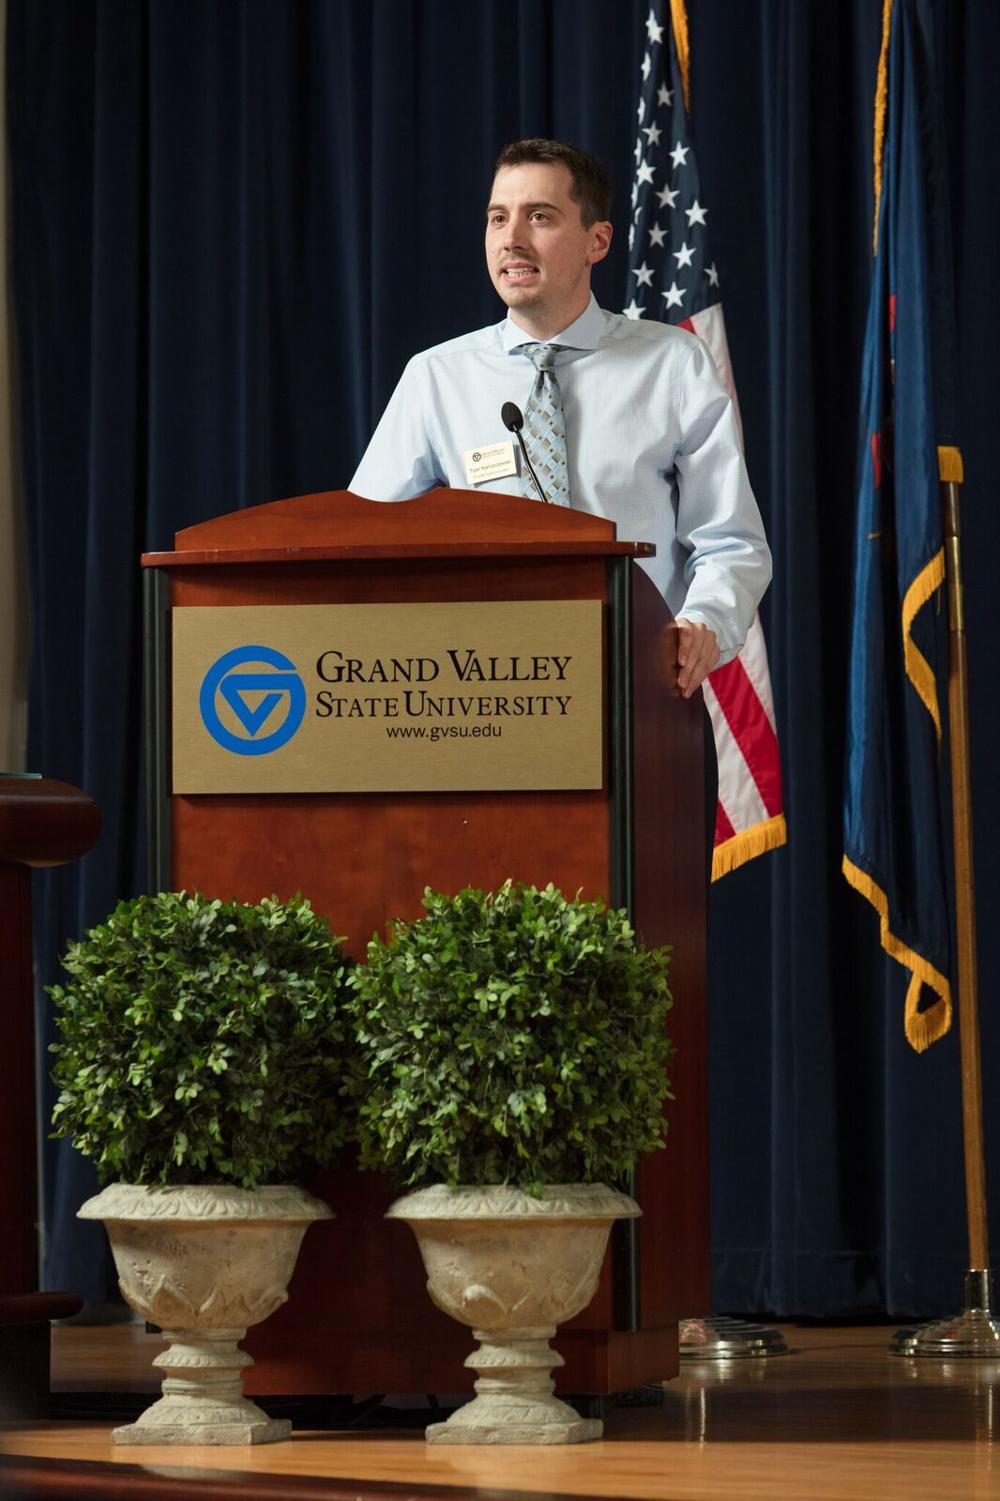 A man standing at a GVSU podium, speaking to the audience